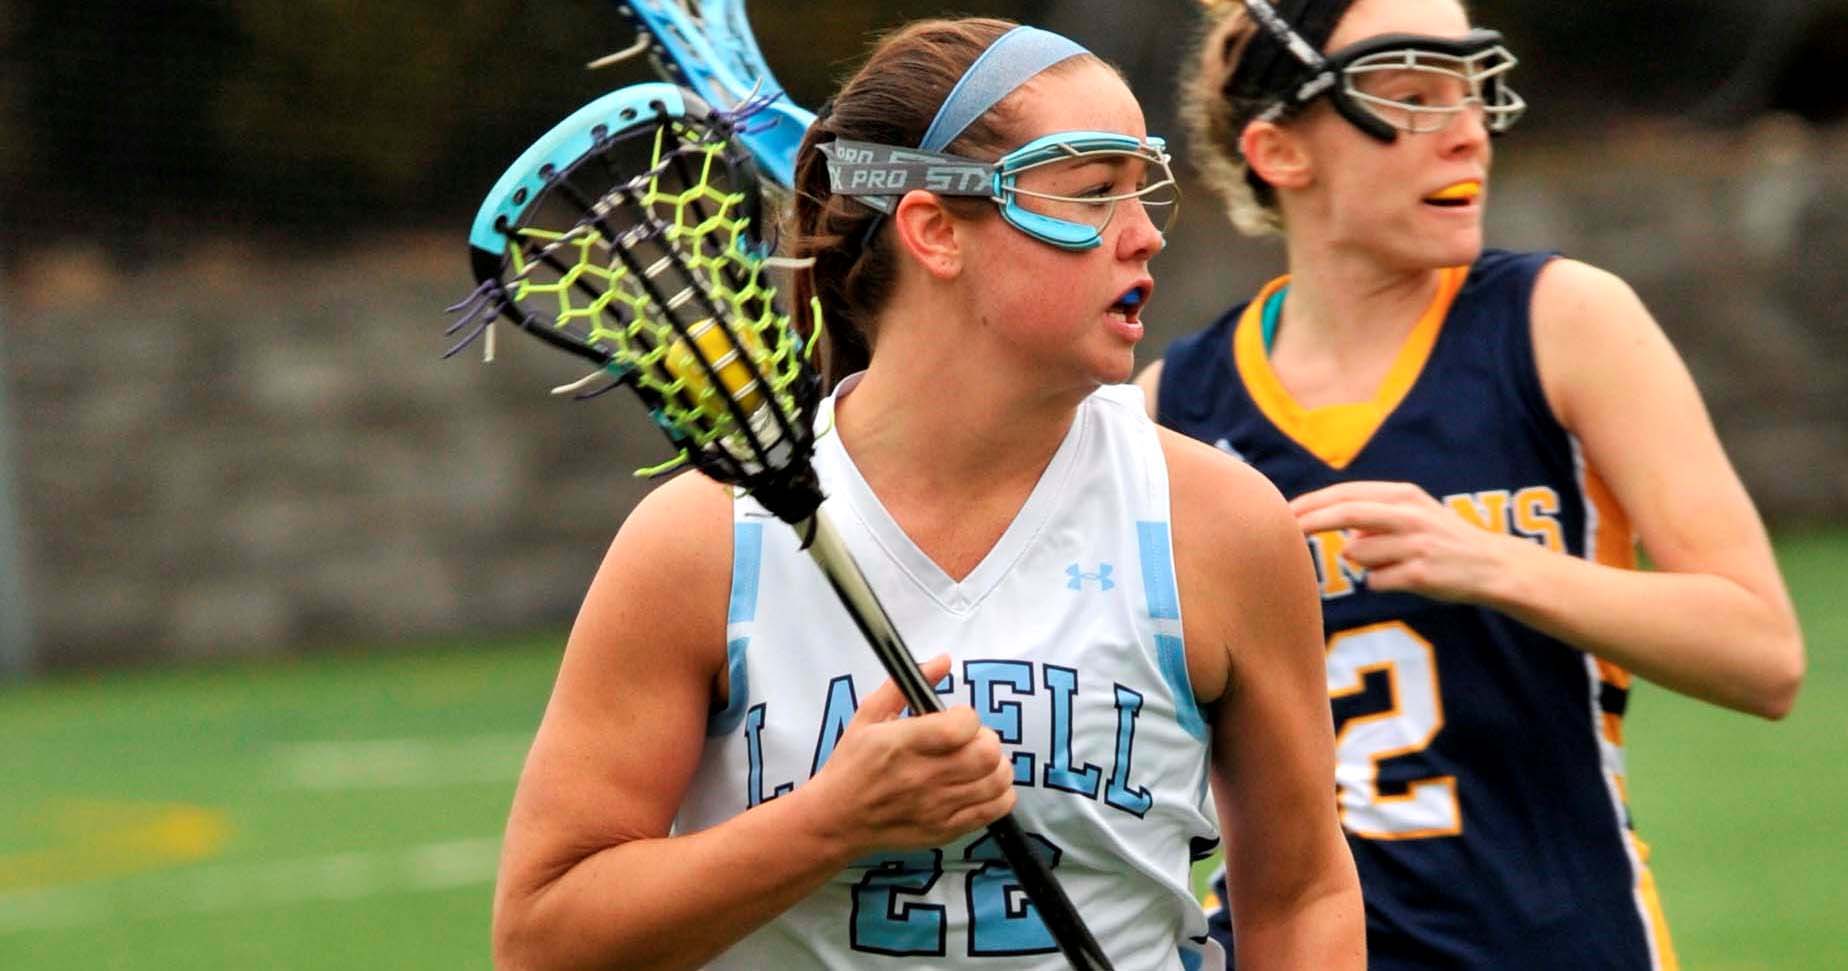 Women's Lacrosse Closes out Regular Season with 18-6 Win over Albertus